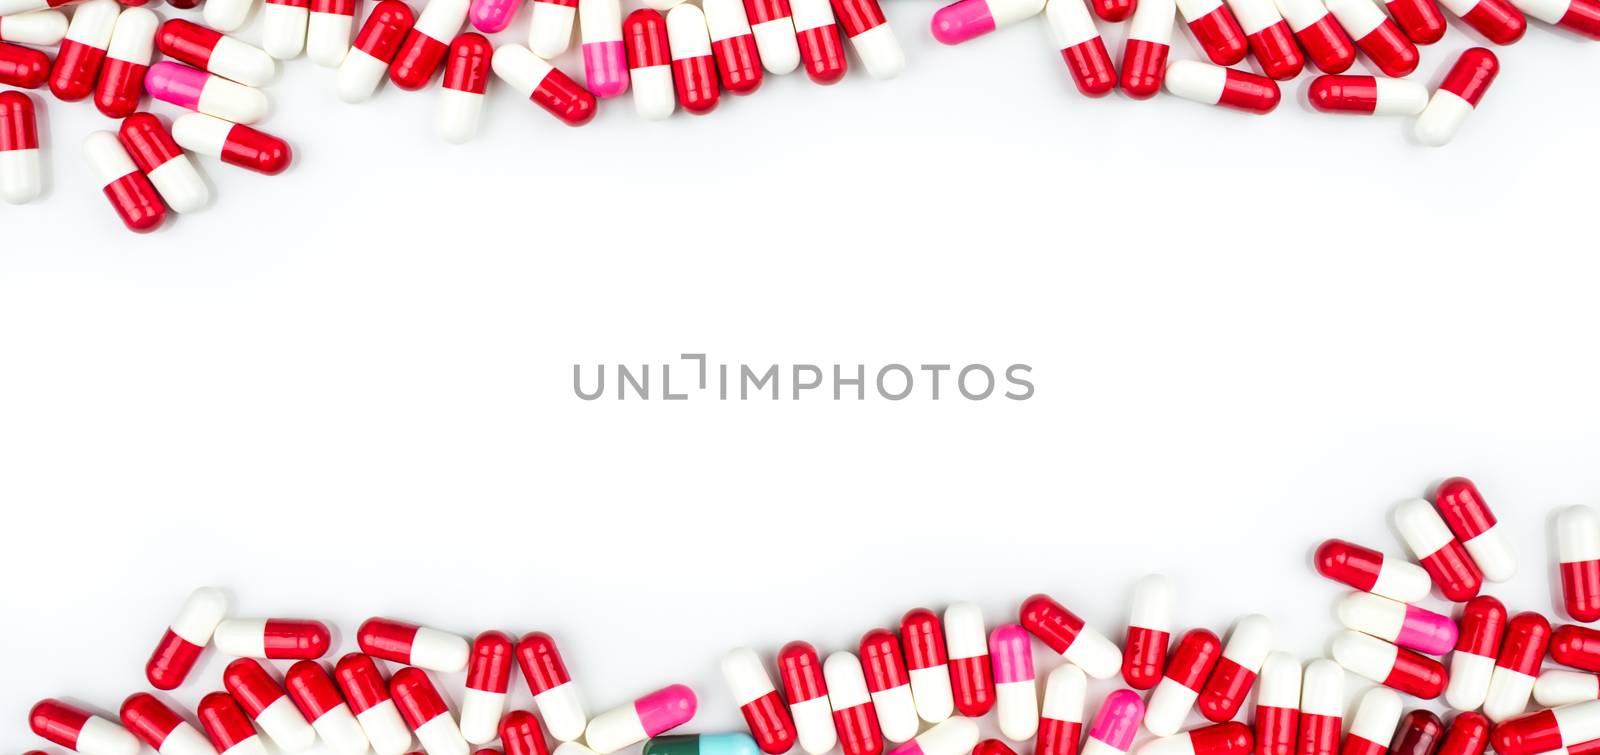 Colorful of antibiotic capsules pills isolated on white background with copy space for text. Drug resistance concept. Antibiotics drug use with reasonable and global healthcare concept. Pharmaceutical industry. Pharmacy background.